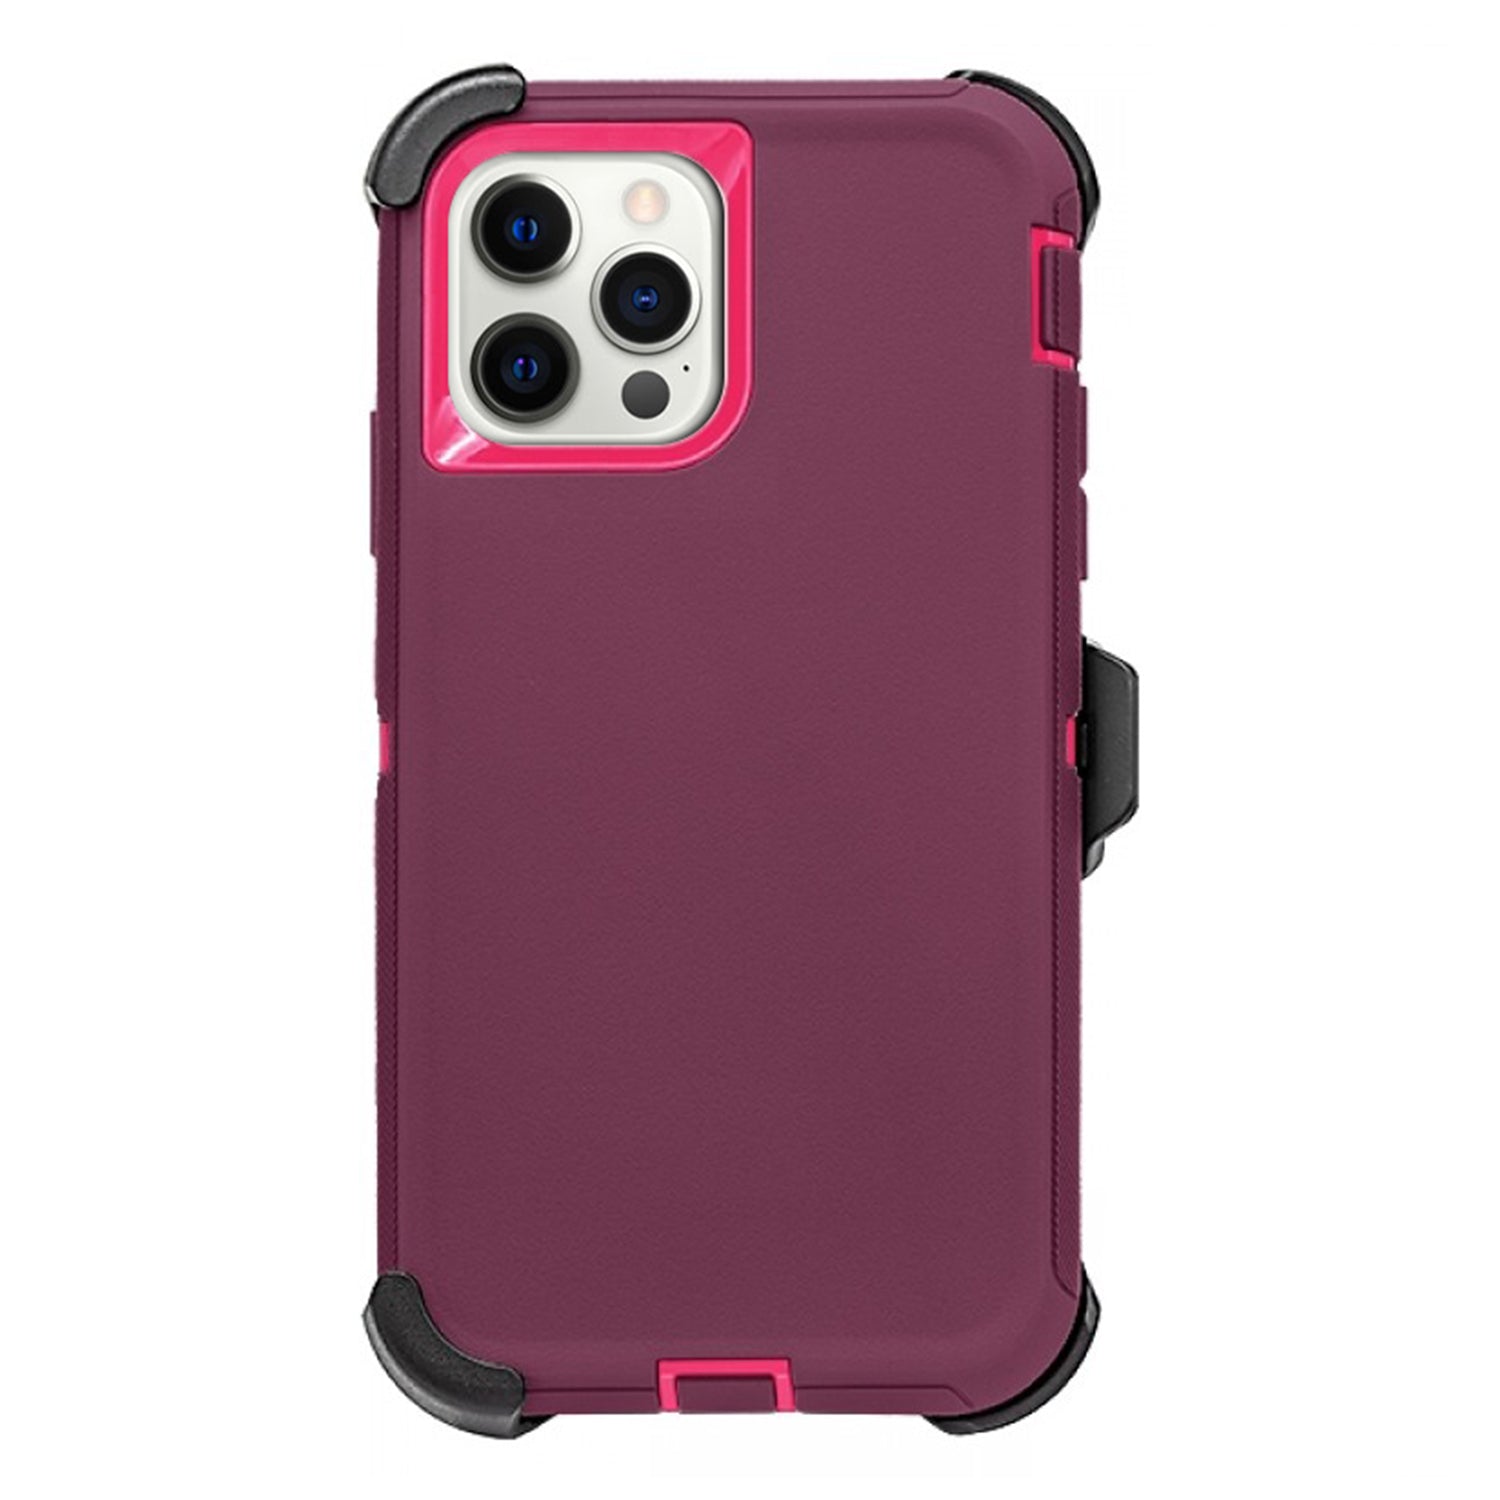 Designed for iPhone 11 Silicone Case, Protection Shockproof Dropproof  Dustproof Anti-Scratch Phone Case Cover for iPhone 11, Hot Pink